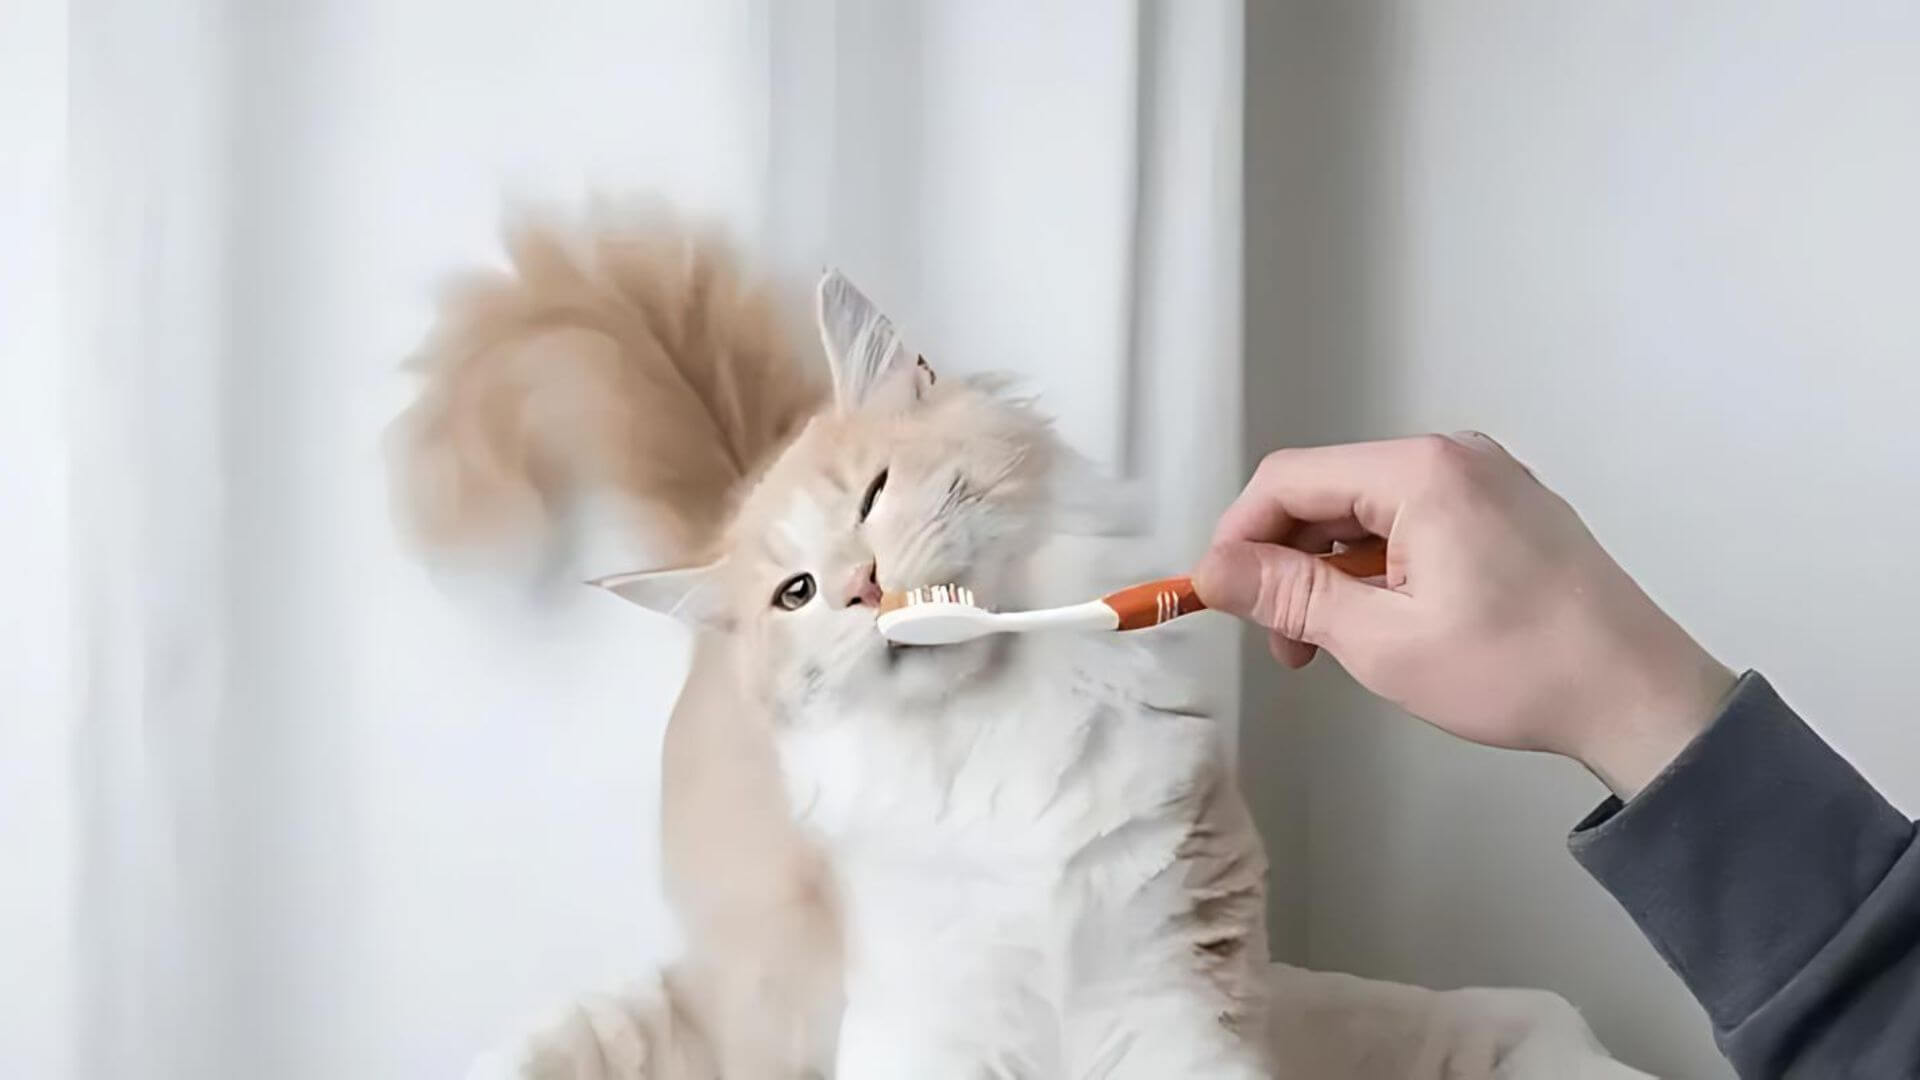 A person brushing cat teeth with a toothbrush